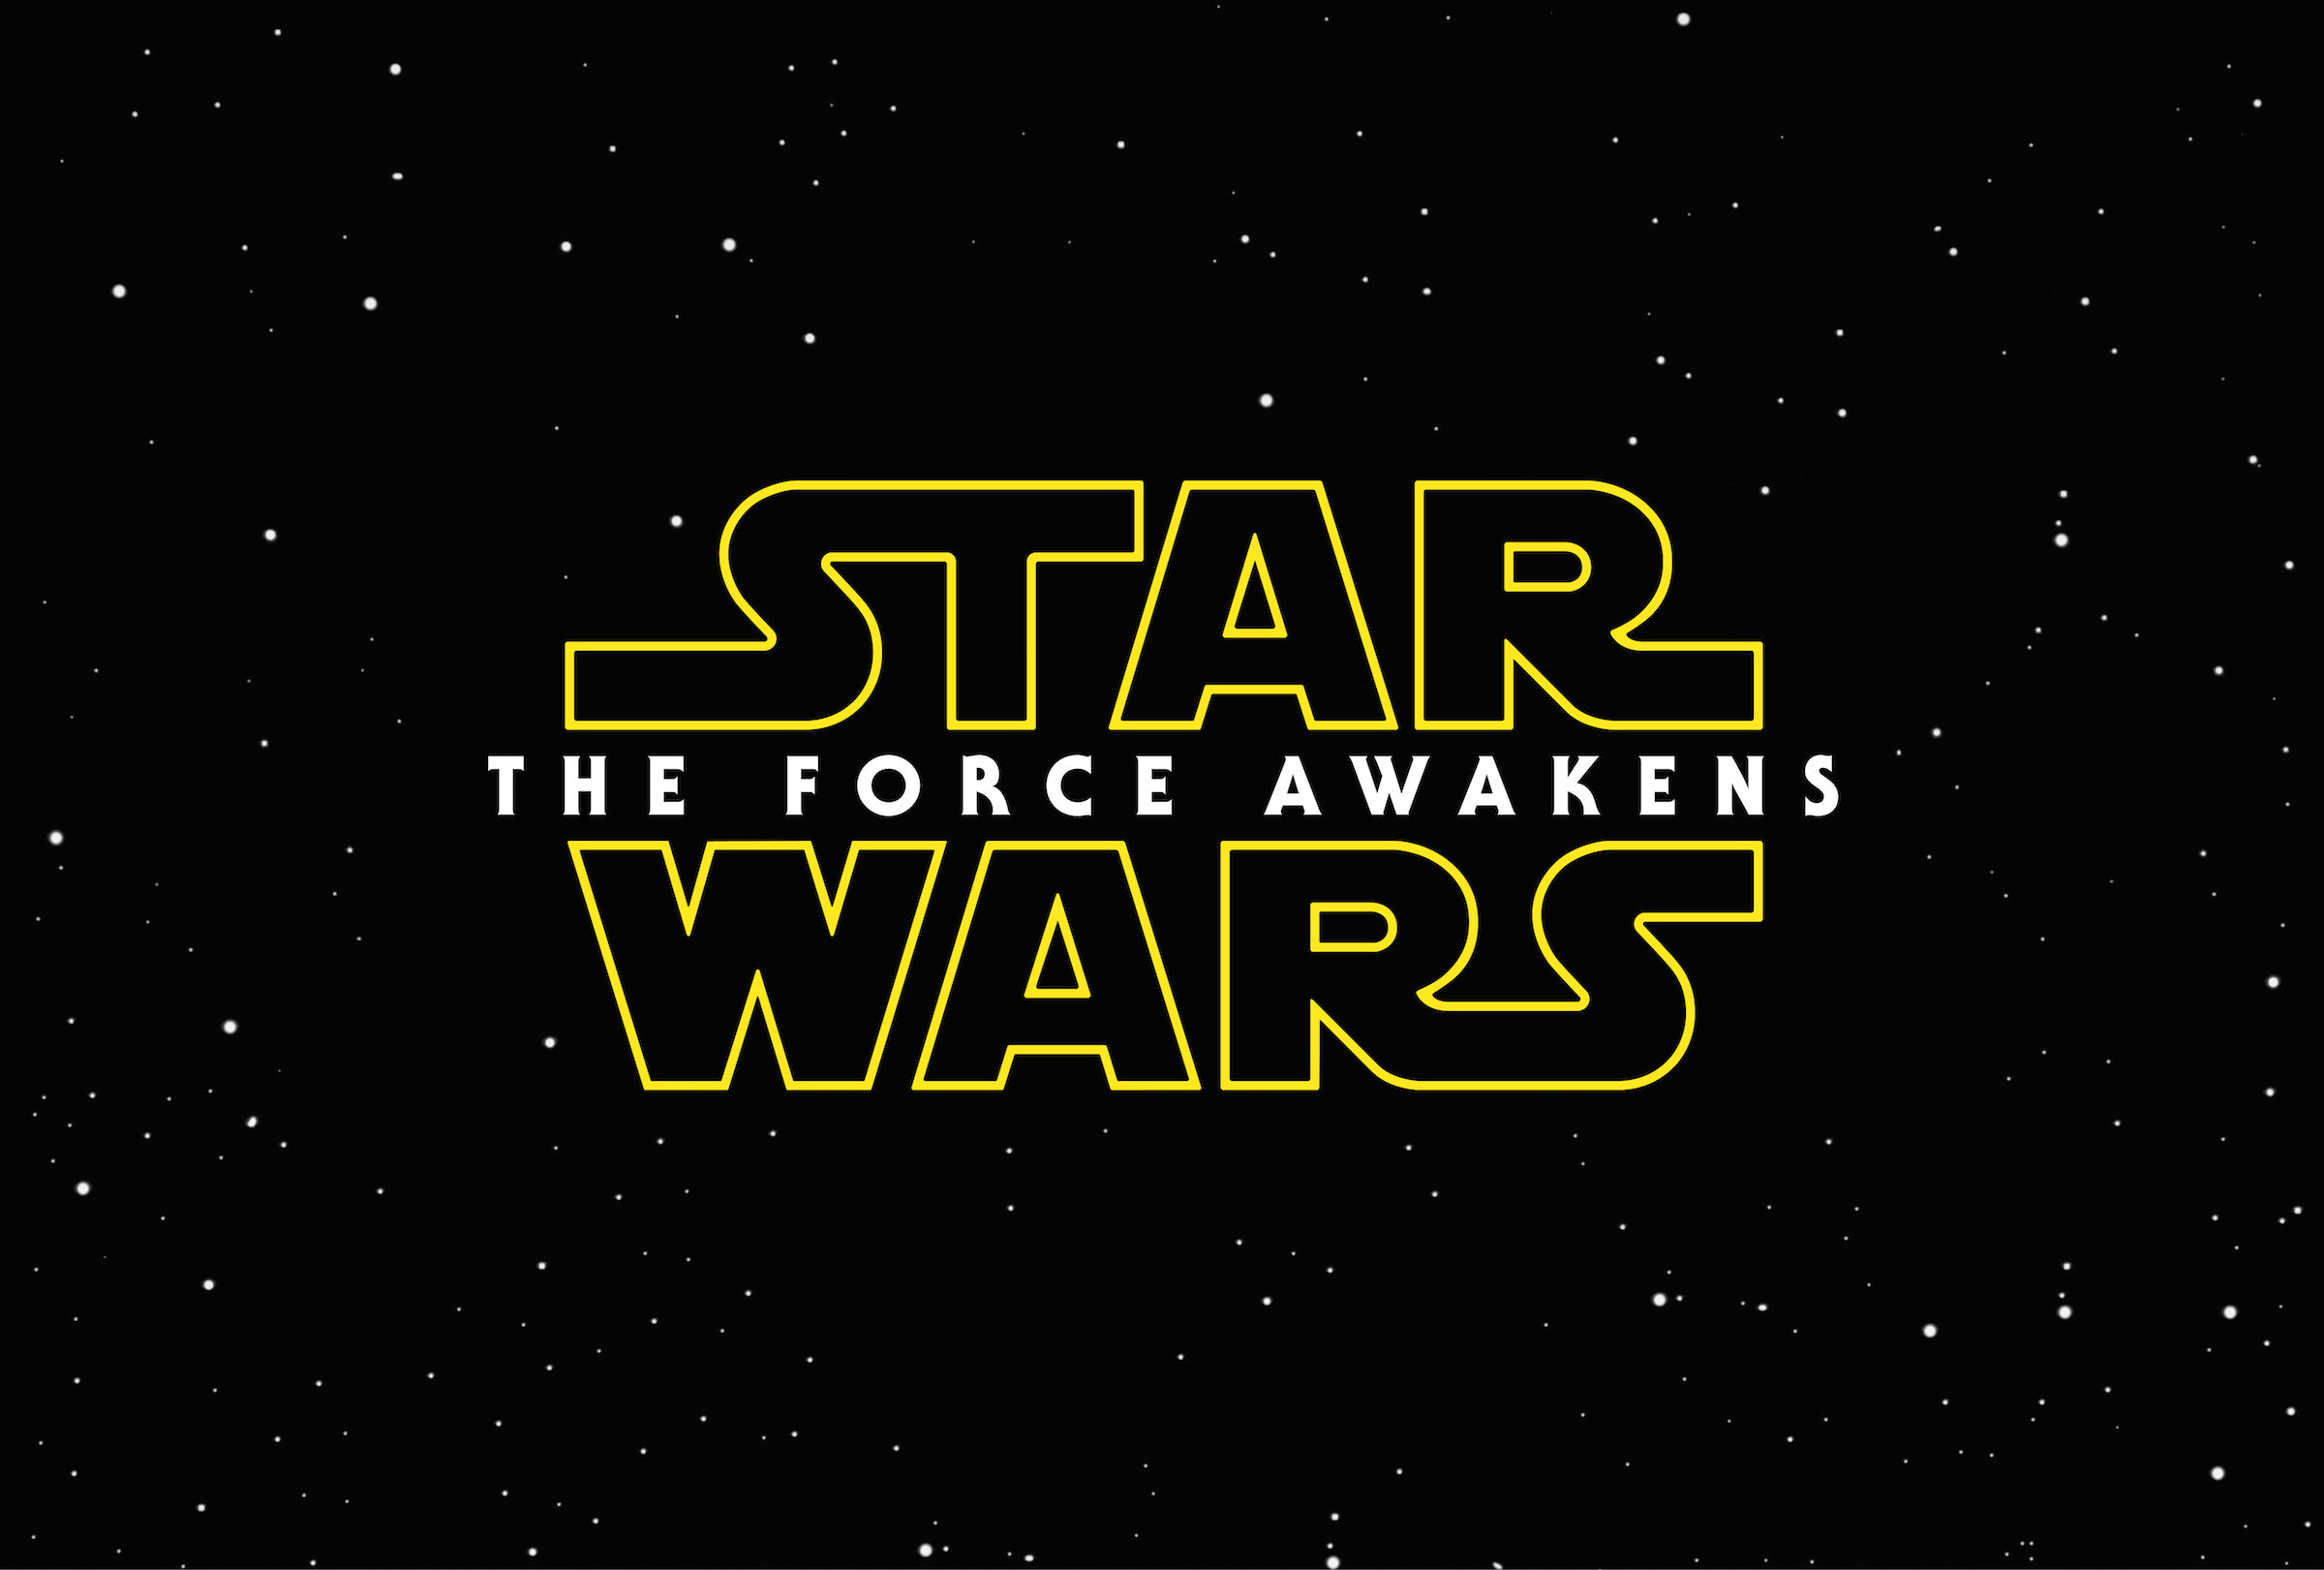 New Footage Shows Star Wars: The Force Awakens Stormtroopers